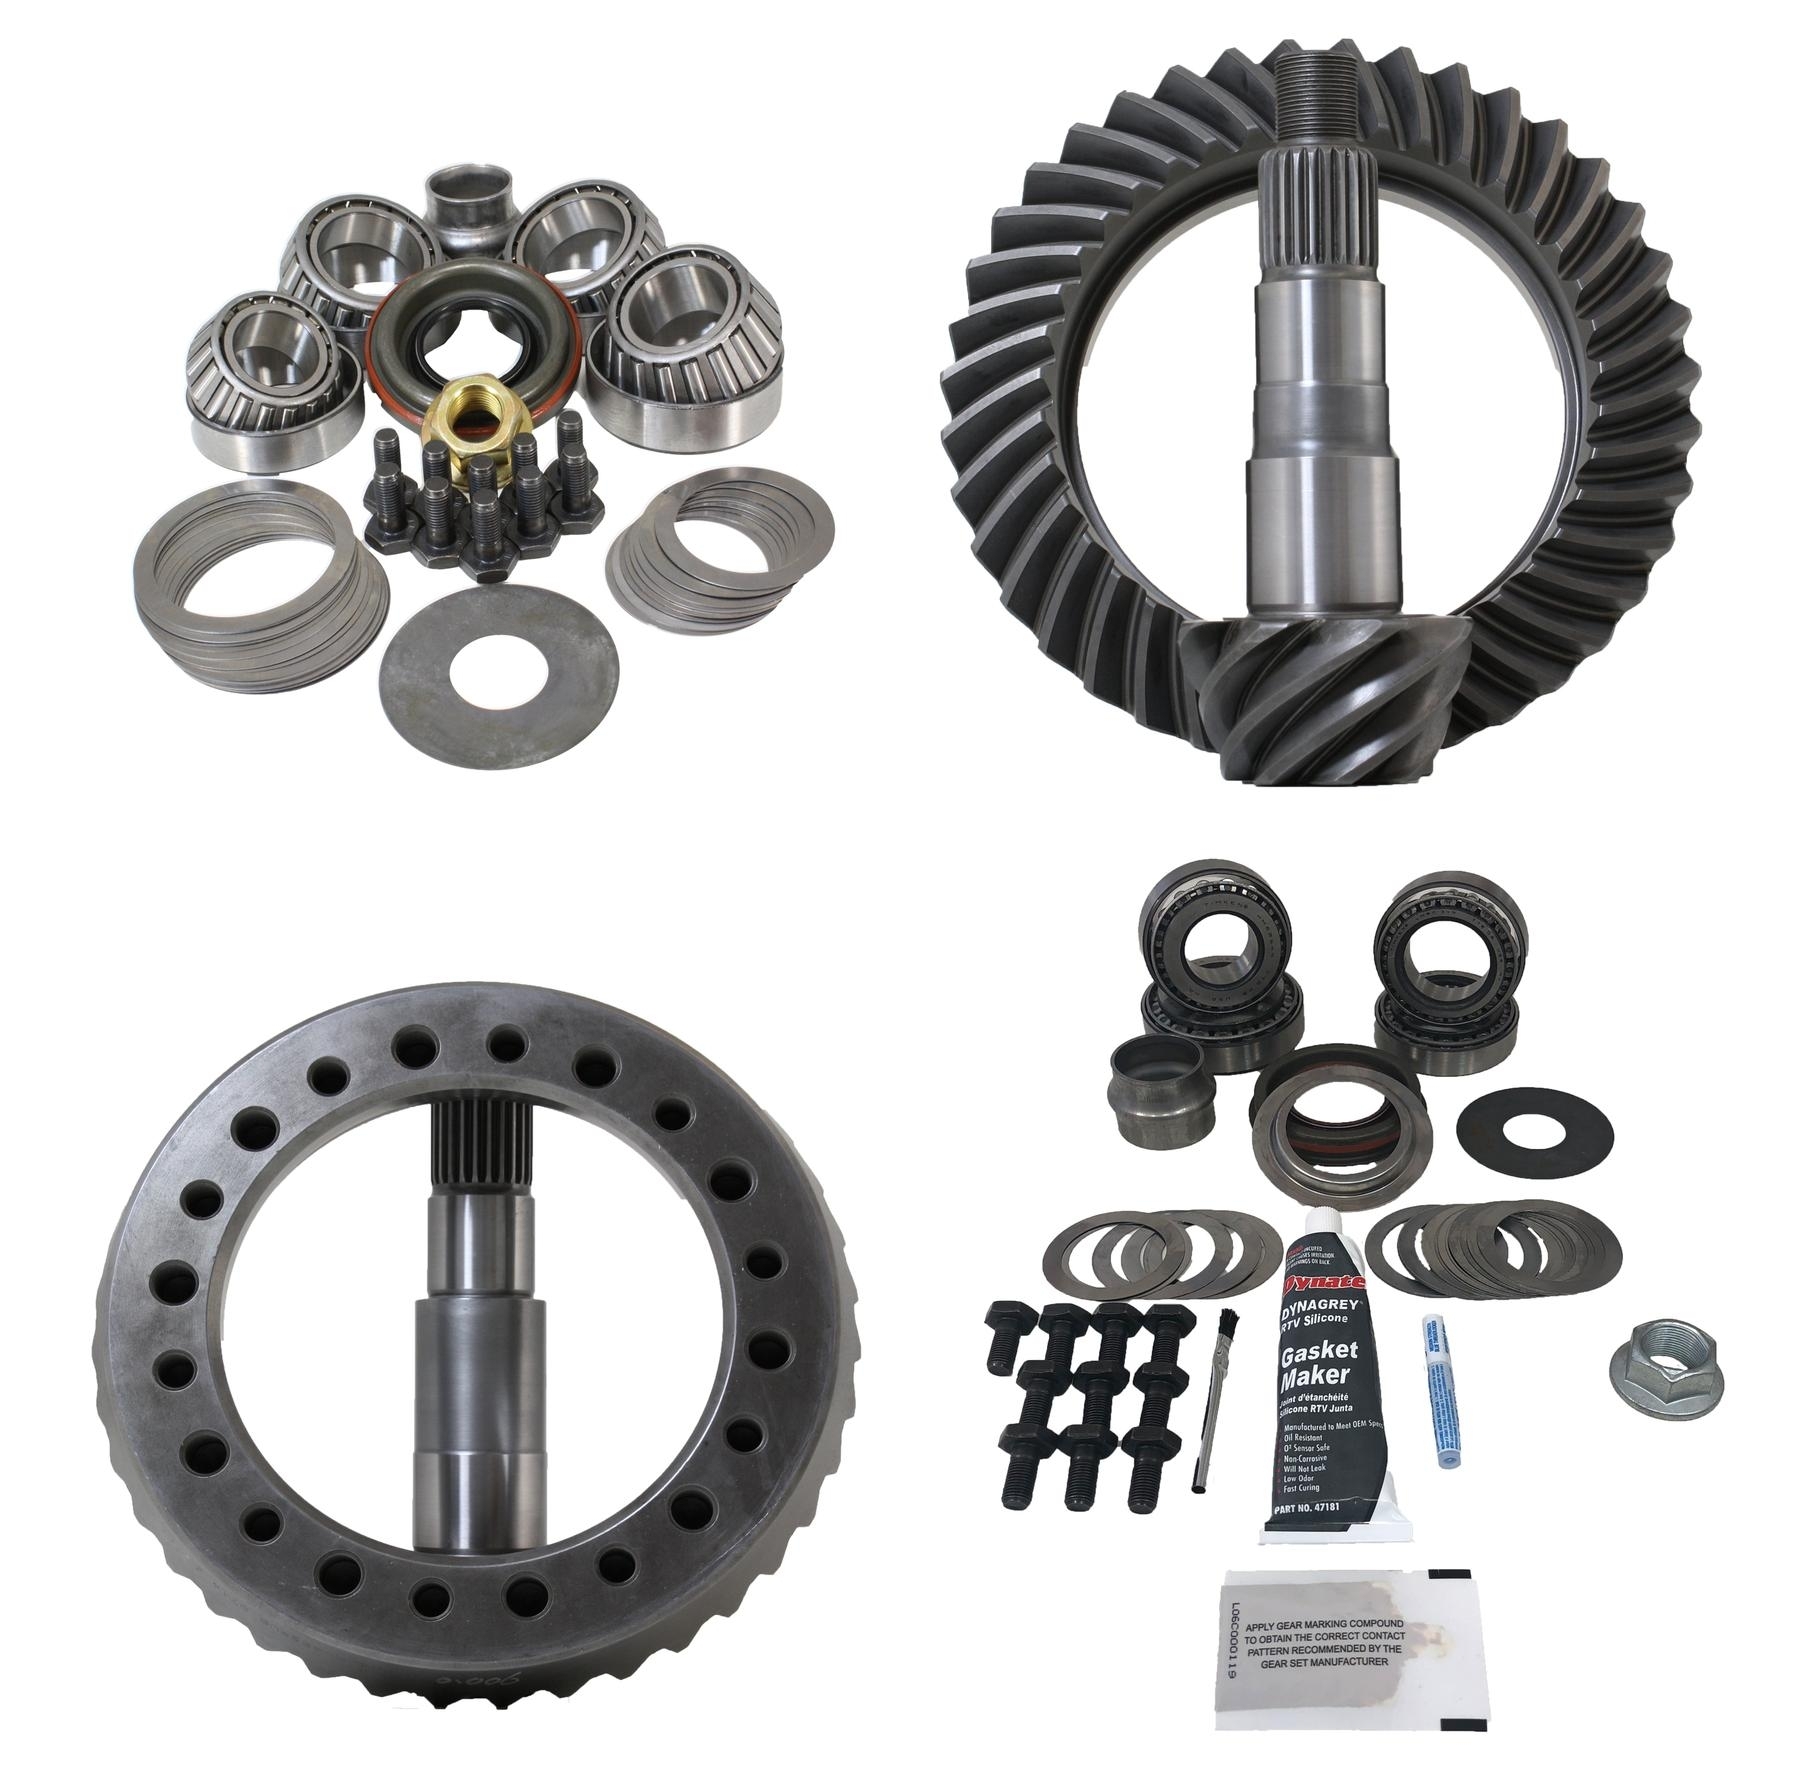 Revolution Gear & Axle Front And Rear Gear Package Without Factory Locker, With Koyo Master Kit,